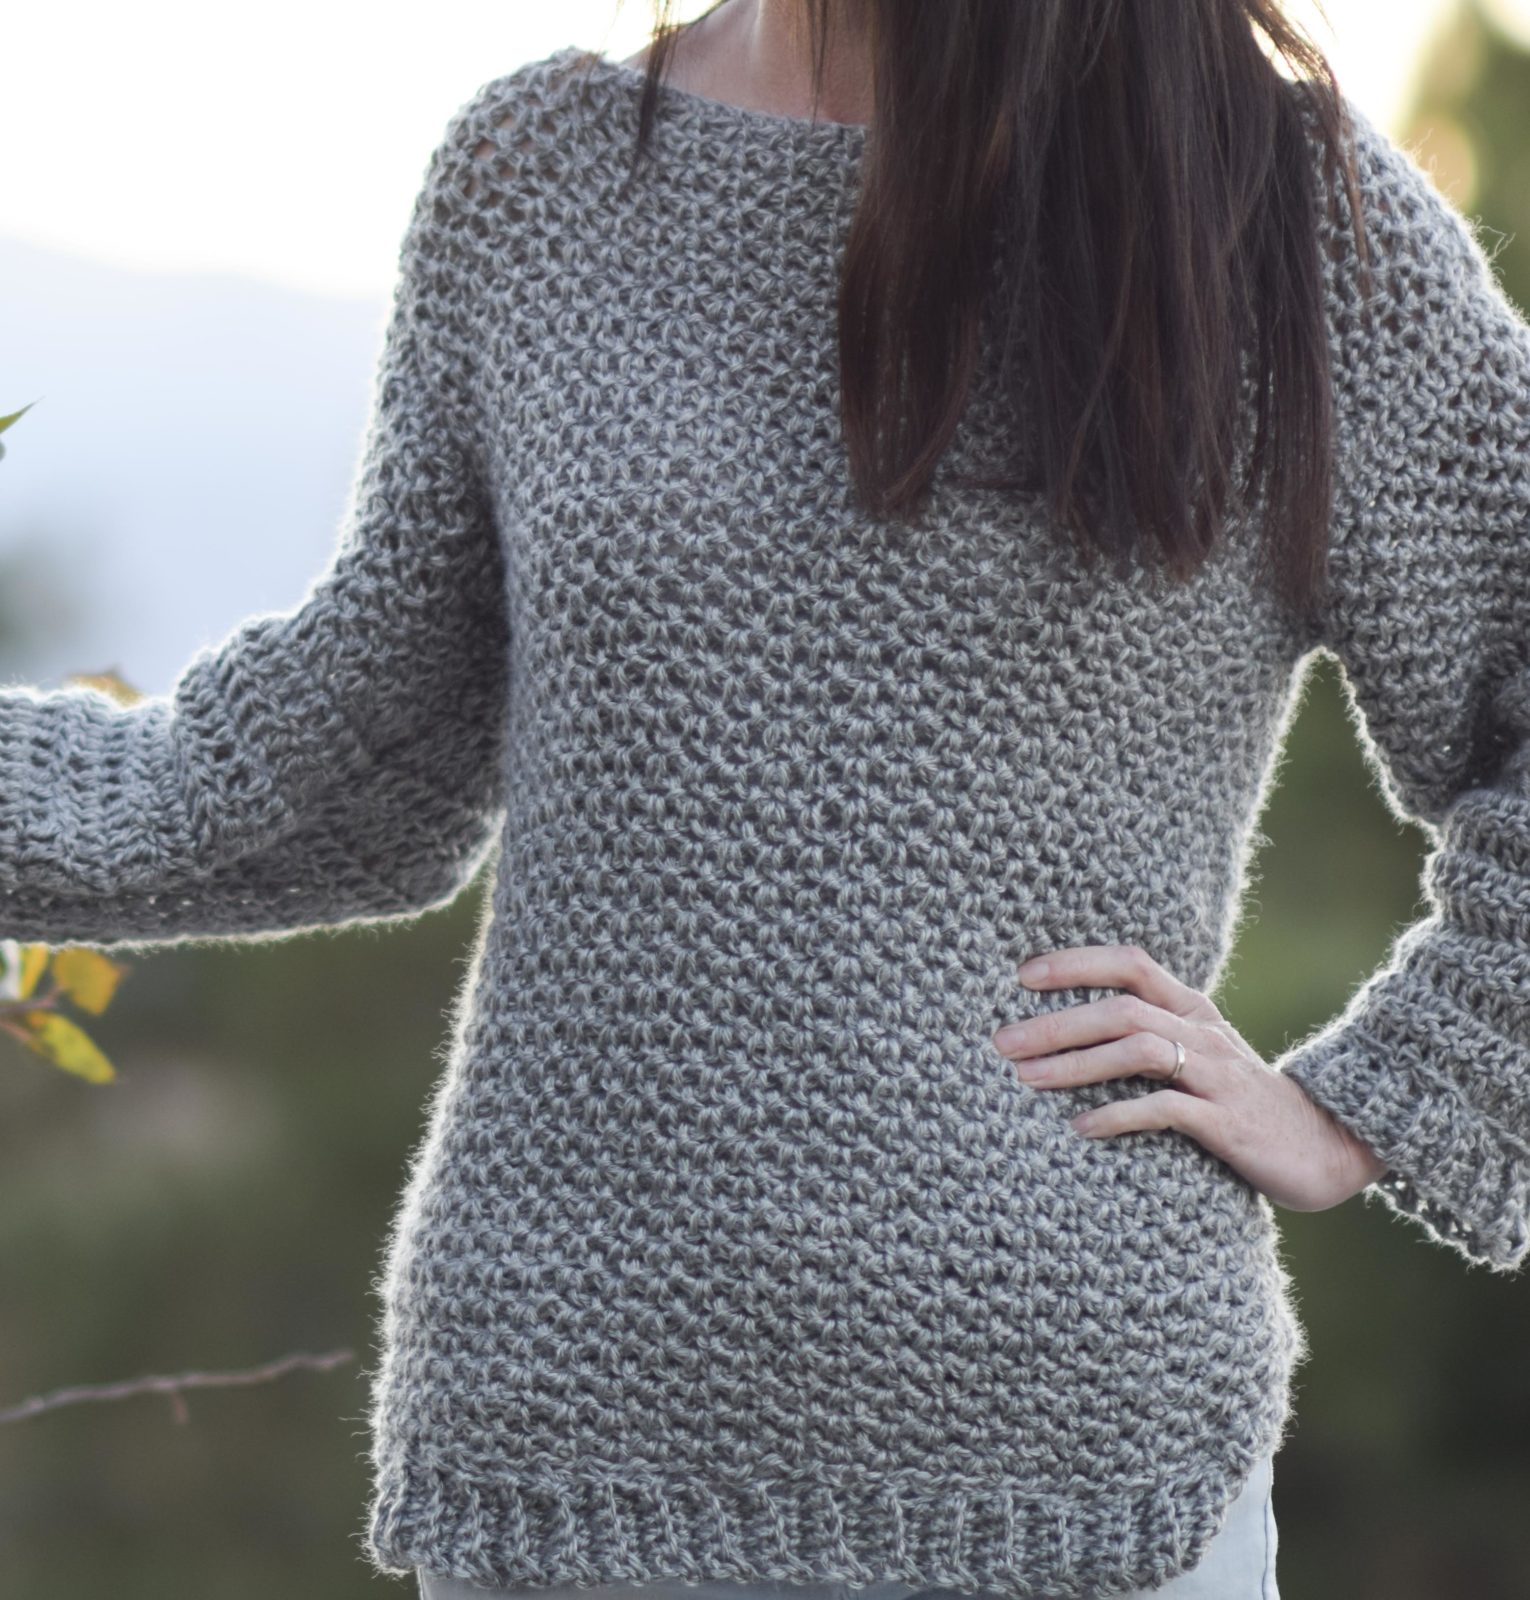 Free Sweater Patterns To Knit How To Make An Easy Crocheted Sweater Knit Like Mama In A Stitch